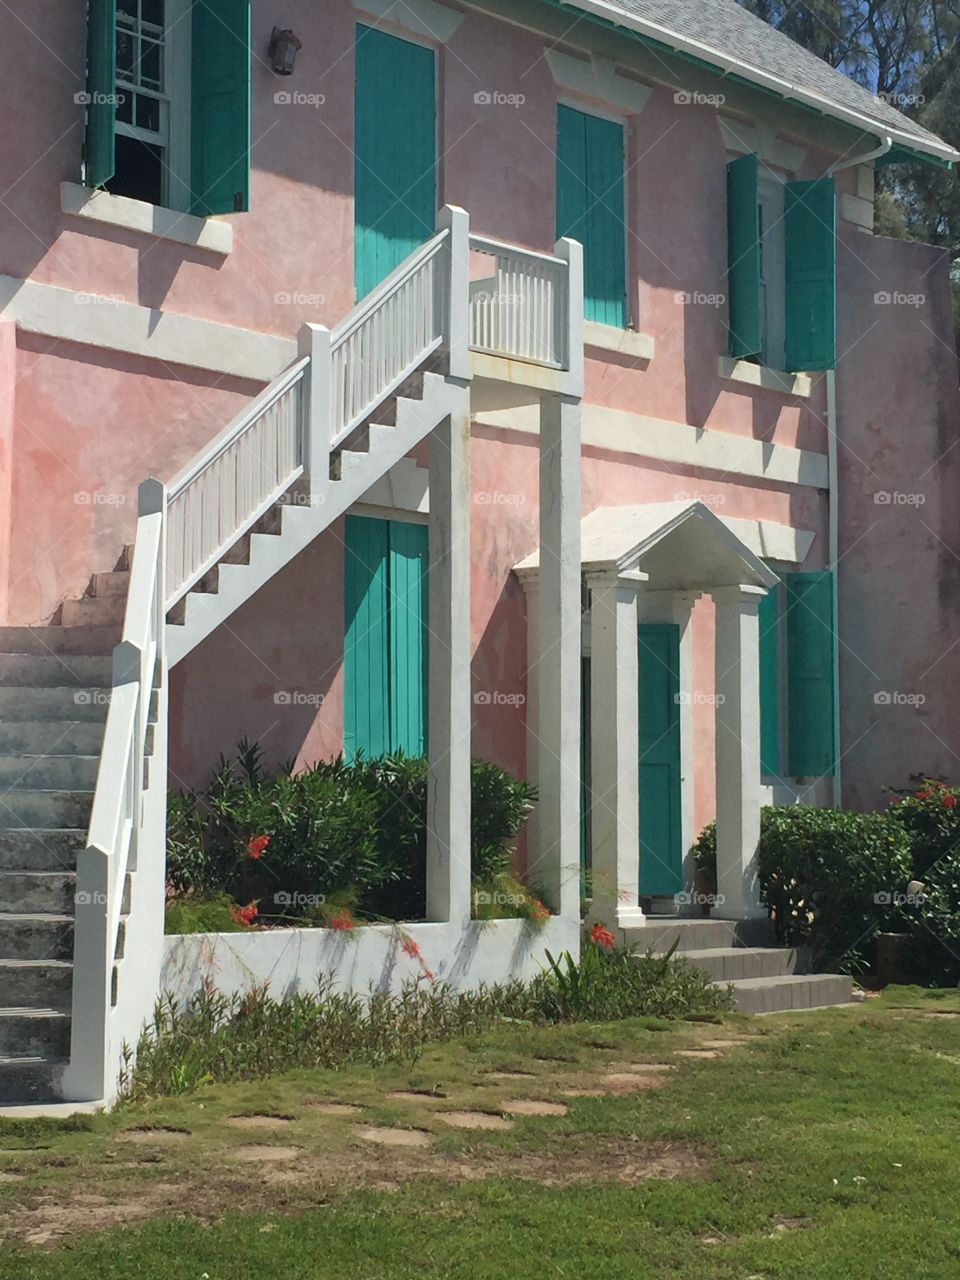 Library in Governor's Harbor in Eleuthera, Bahamas.